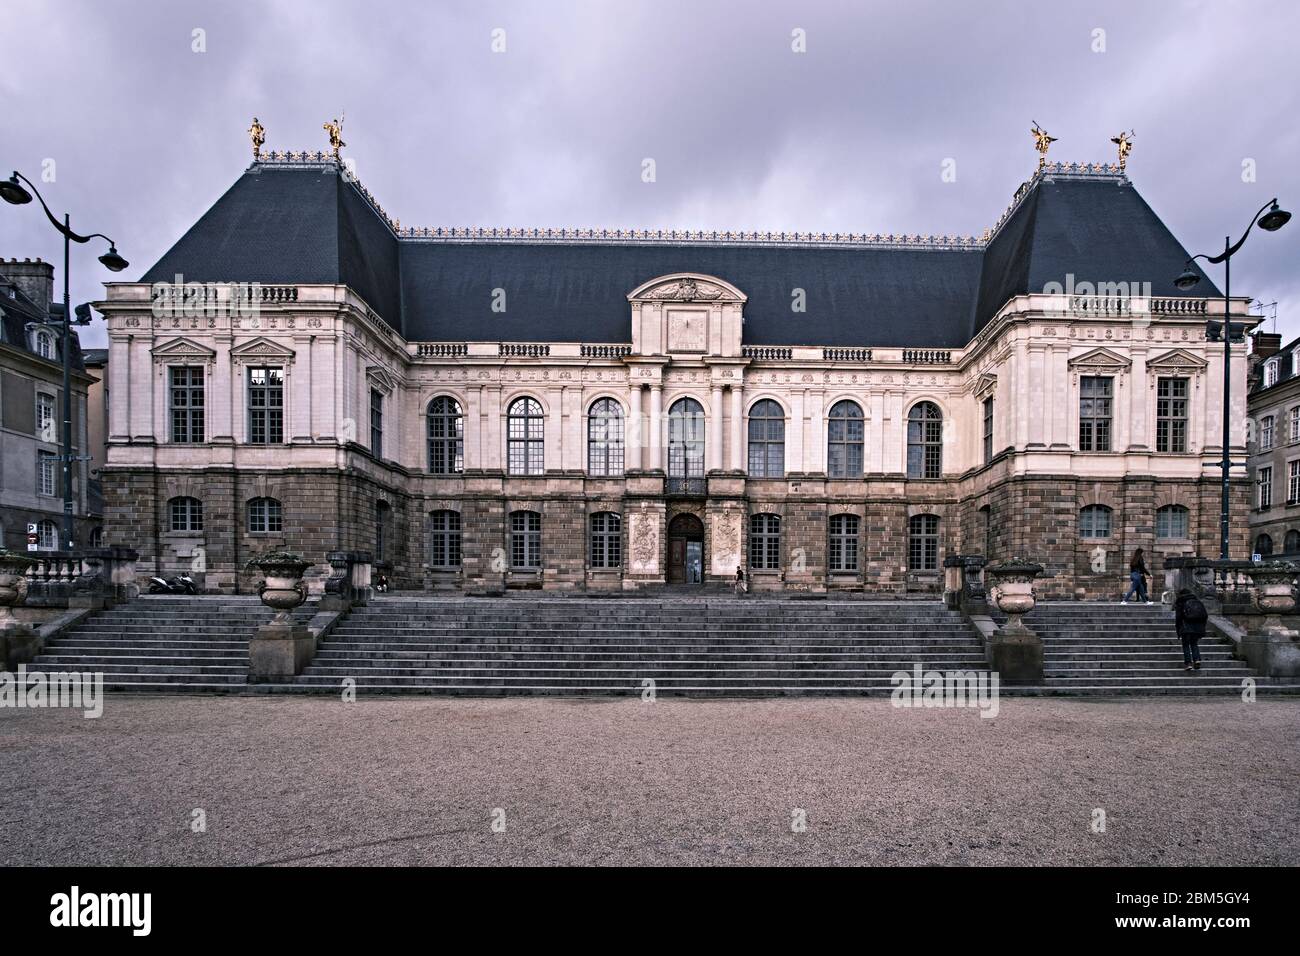 Reconstructed parliament of Brittany Court of Appeals  Built in the classic architecture style Stock Photo